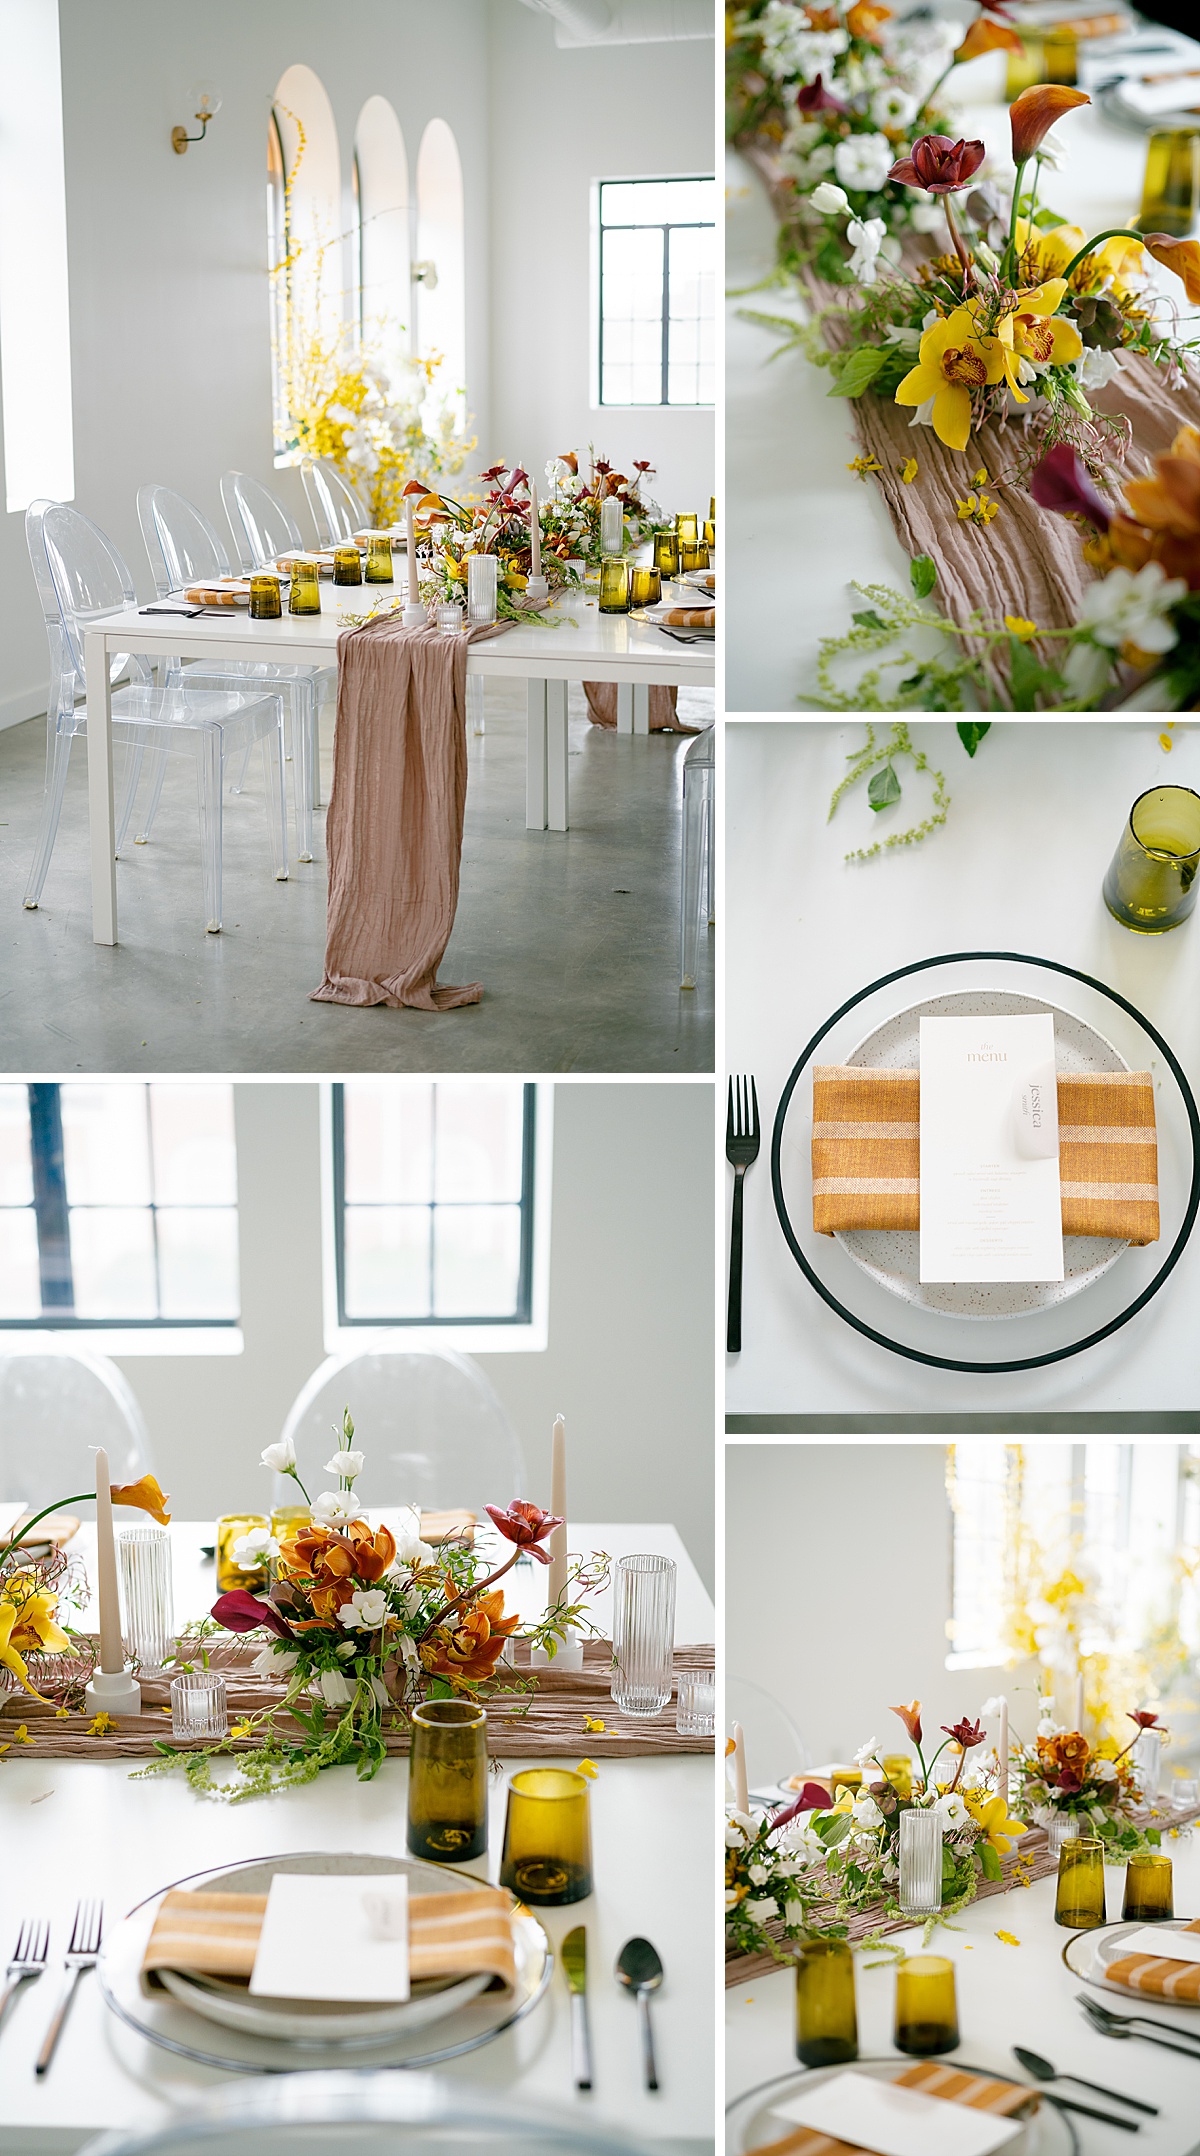 Modern vintage-inspired wedding tablescape design at The Juliet in Kansas City, MO.